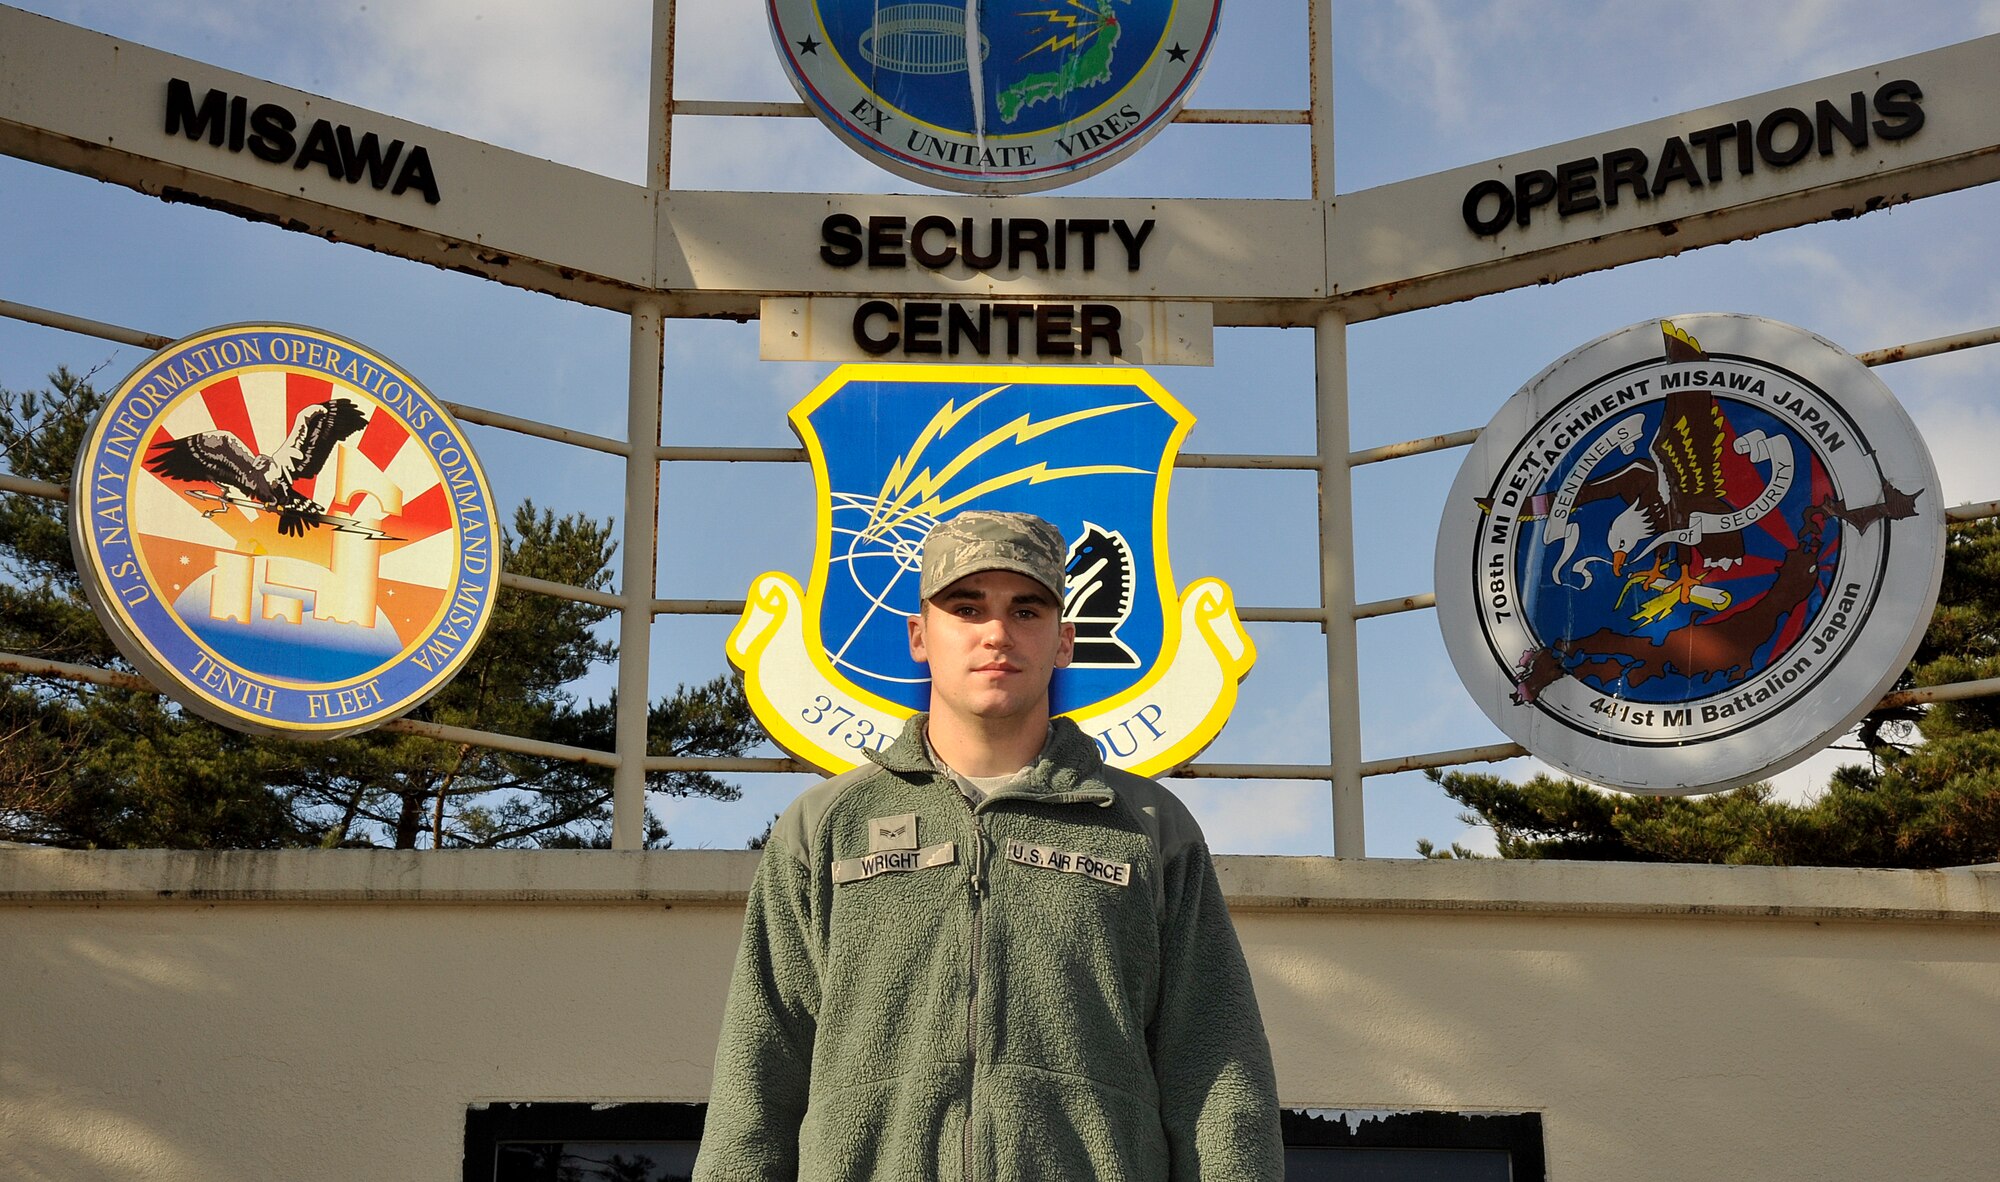 U.S. Air Force Senior Airman Jacob Wright, 373rd Support Squadron, knowledge operations management technician, poses in front of the Misawa Security Operations Center welcome sign at Misawa Air Base, Japan, Dec. 12, 2014. Along with other members of the MSOC, Wright provides communications, maintenance, and administrative support to personnel at Misawa. (U.S. Air Force photo by Airman 1st Class Patrick S. Ciccarone/Released)